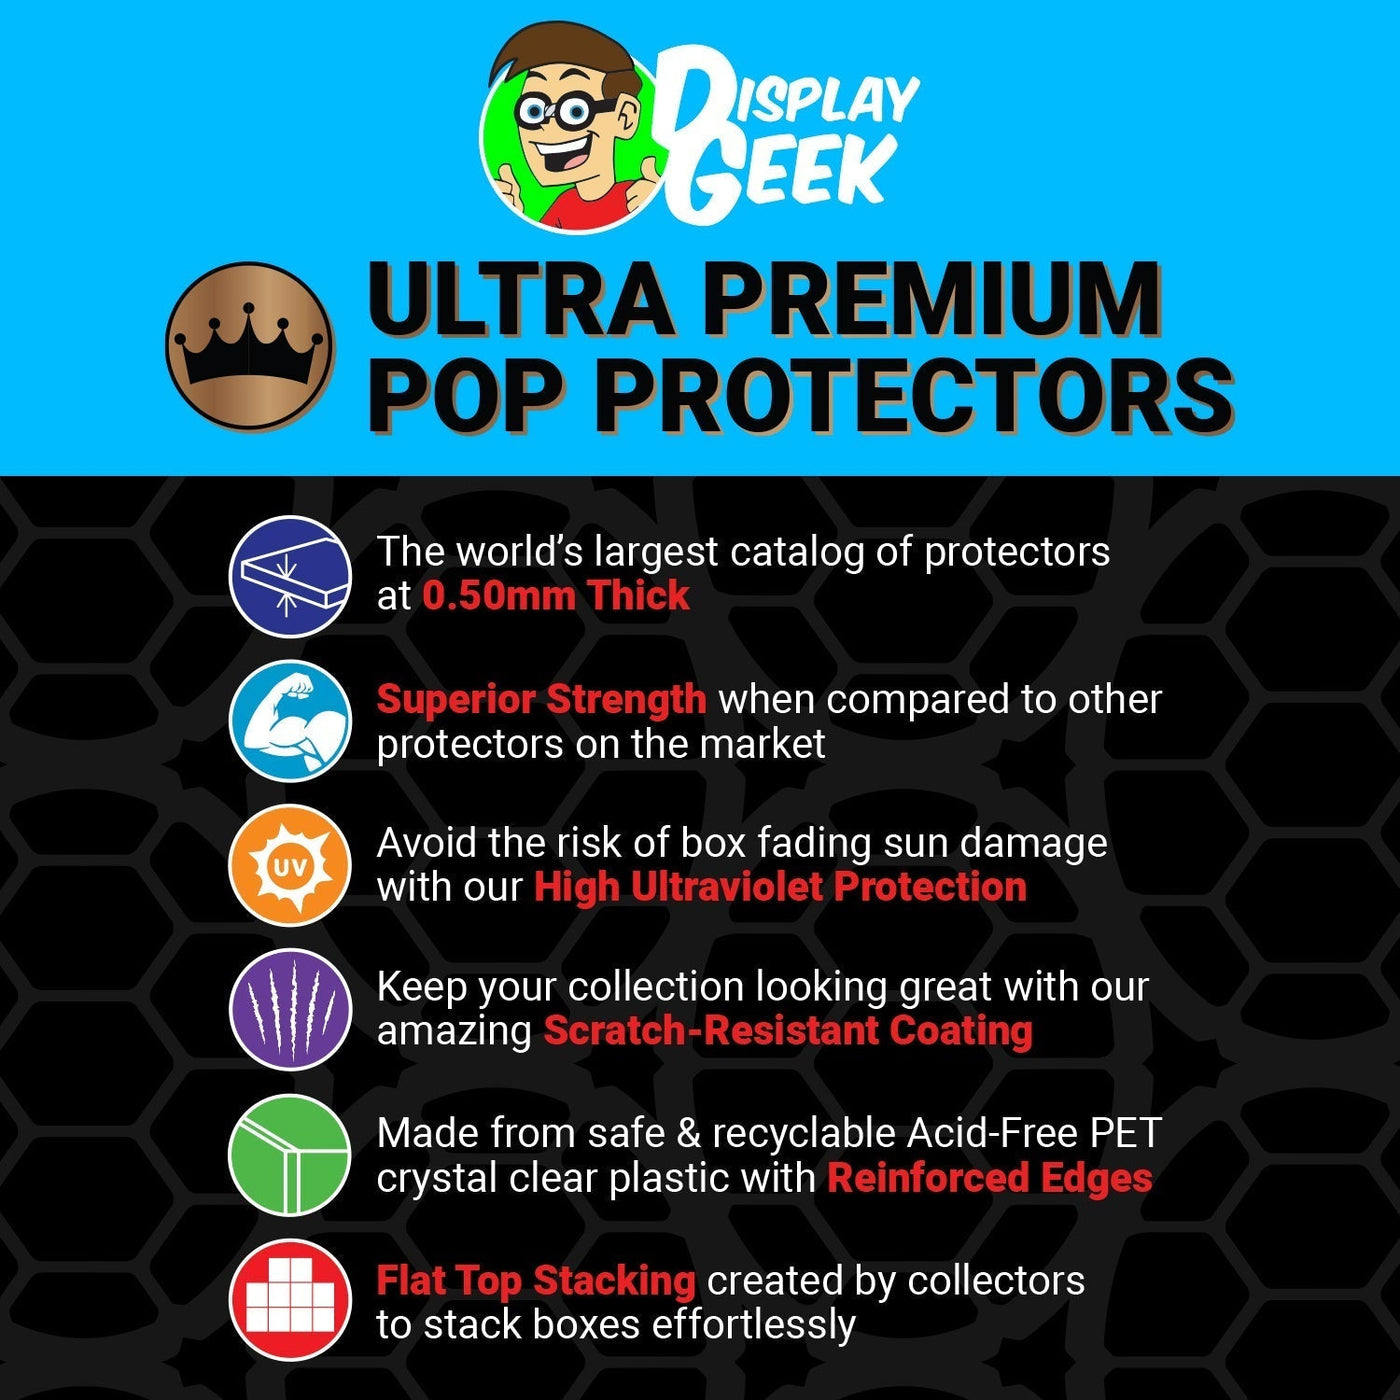 Pop Protector for Vynl 2 Pack Sally & Jack Skellington Funko on The Protector Guide App by Display Geek